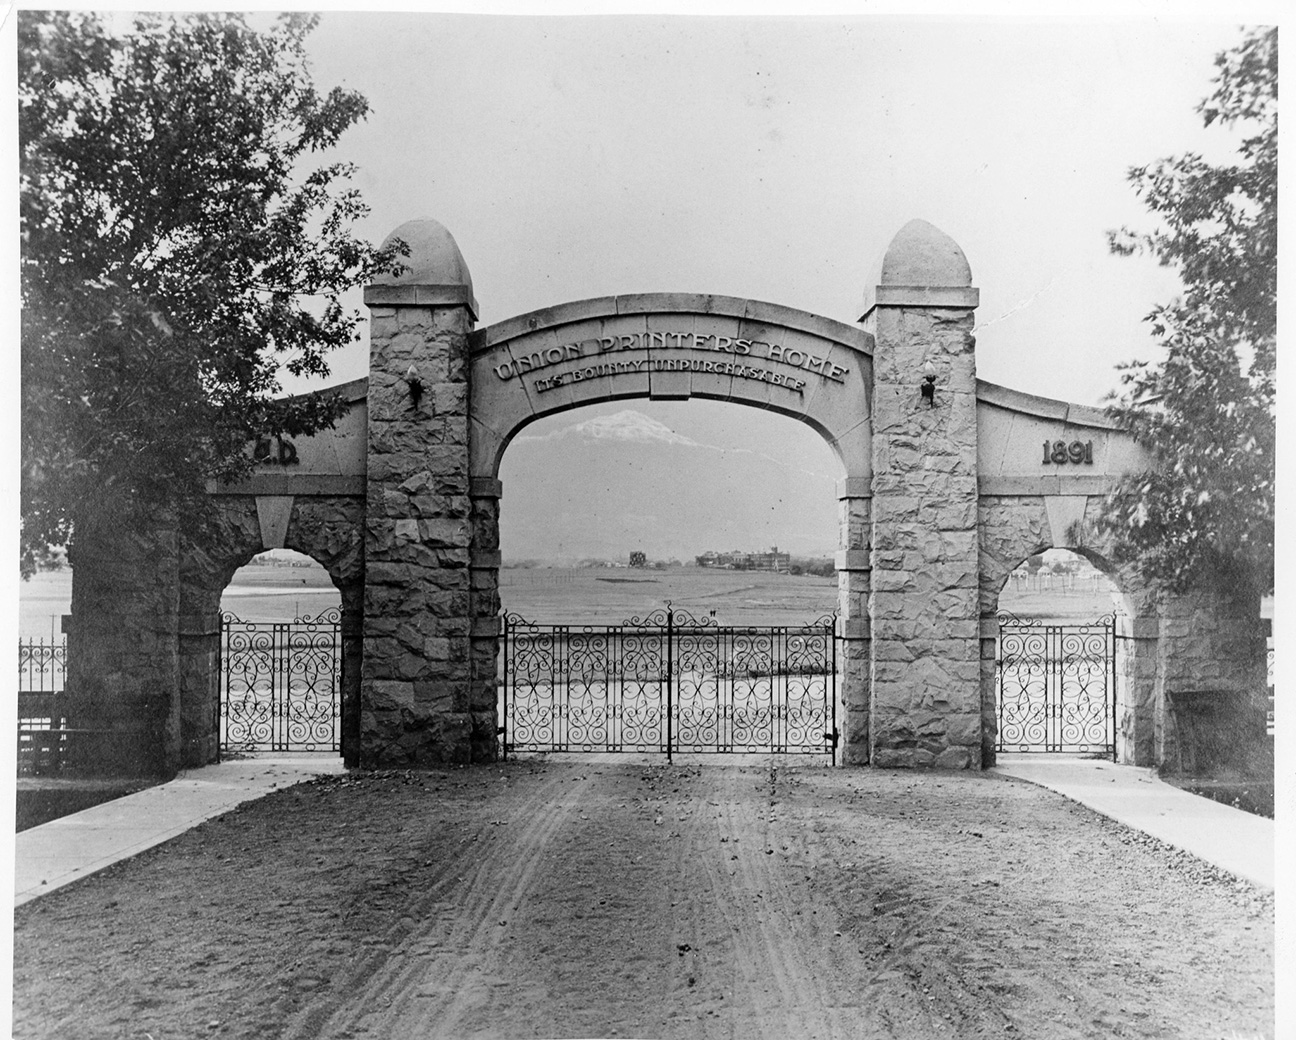 Union Printers Home front gate arch Pikes Peak